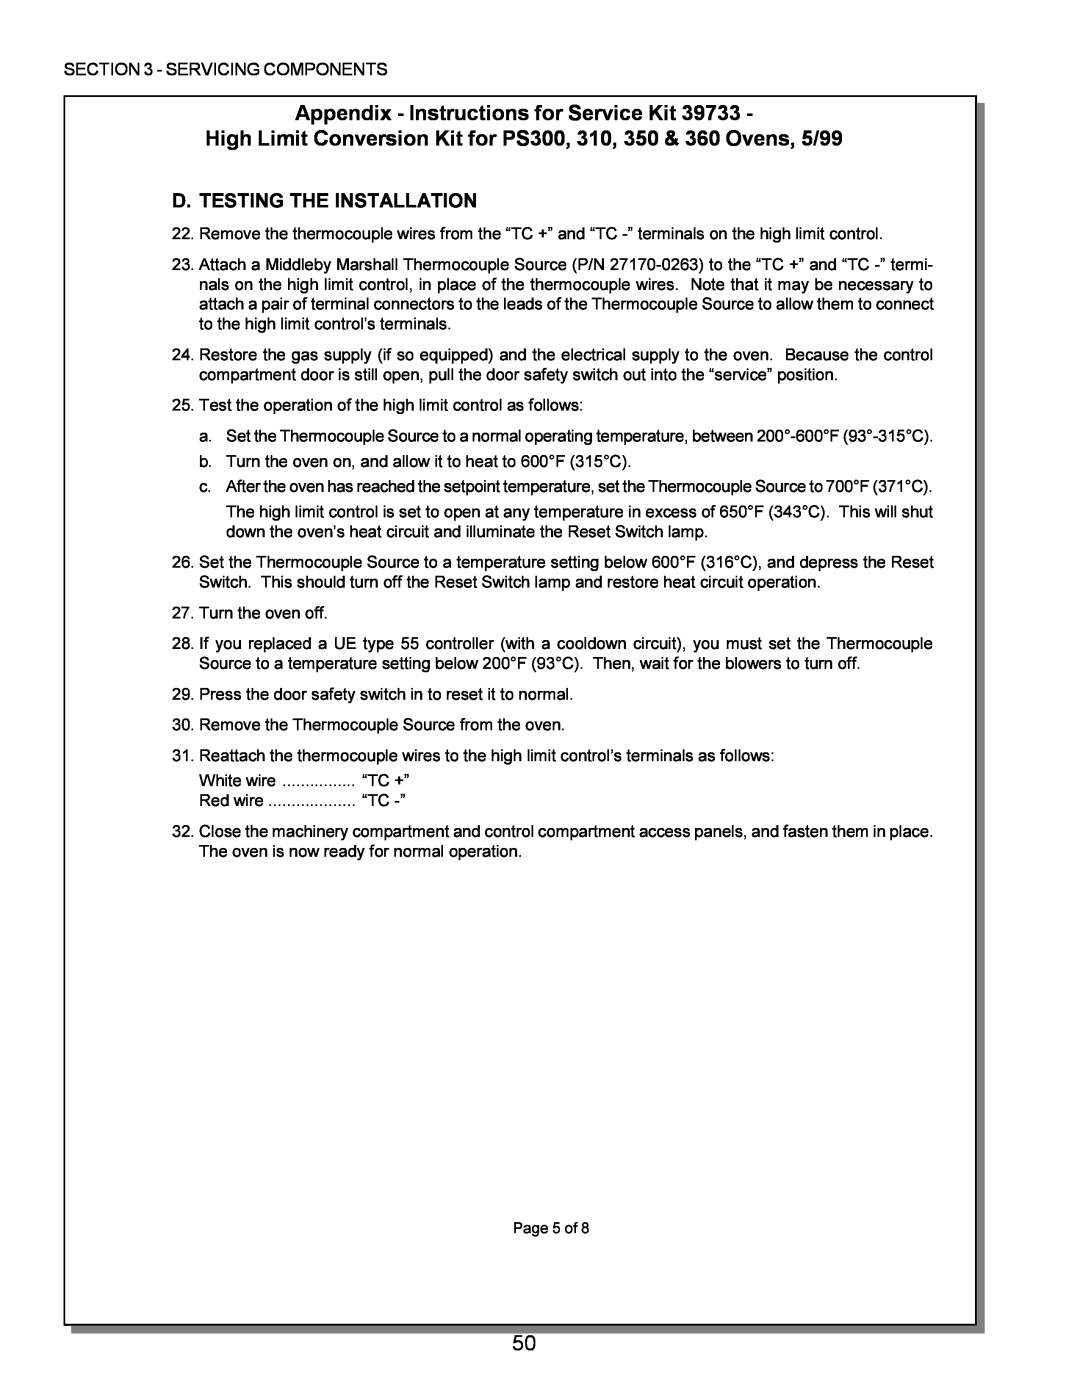 Middleby Marshall PS555, PS570, PS360, PS200 Appendix - Instructions for Service Kit, D. Testing The Installation, Page 5 of 